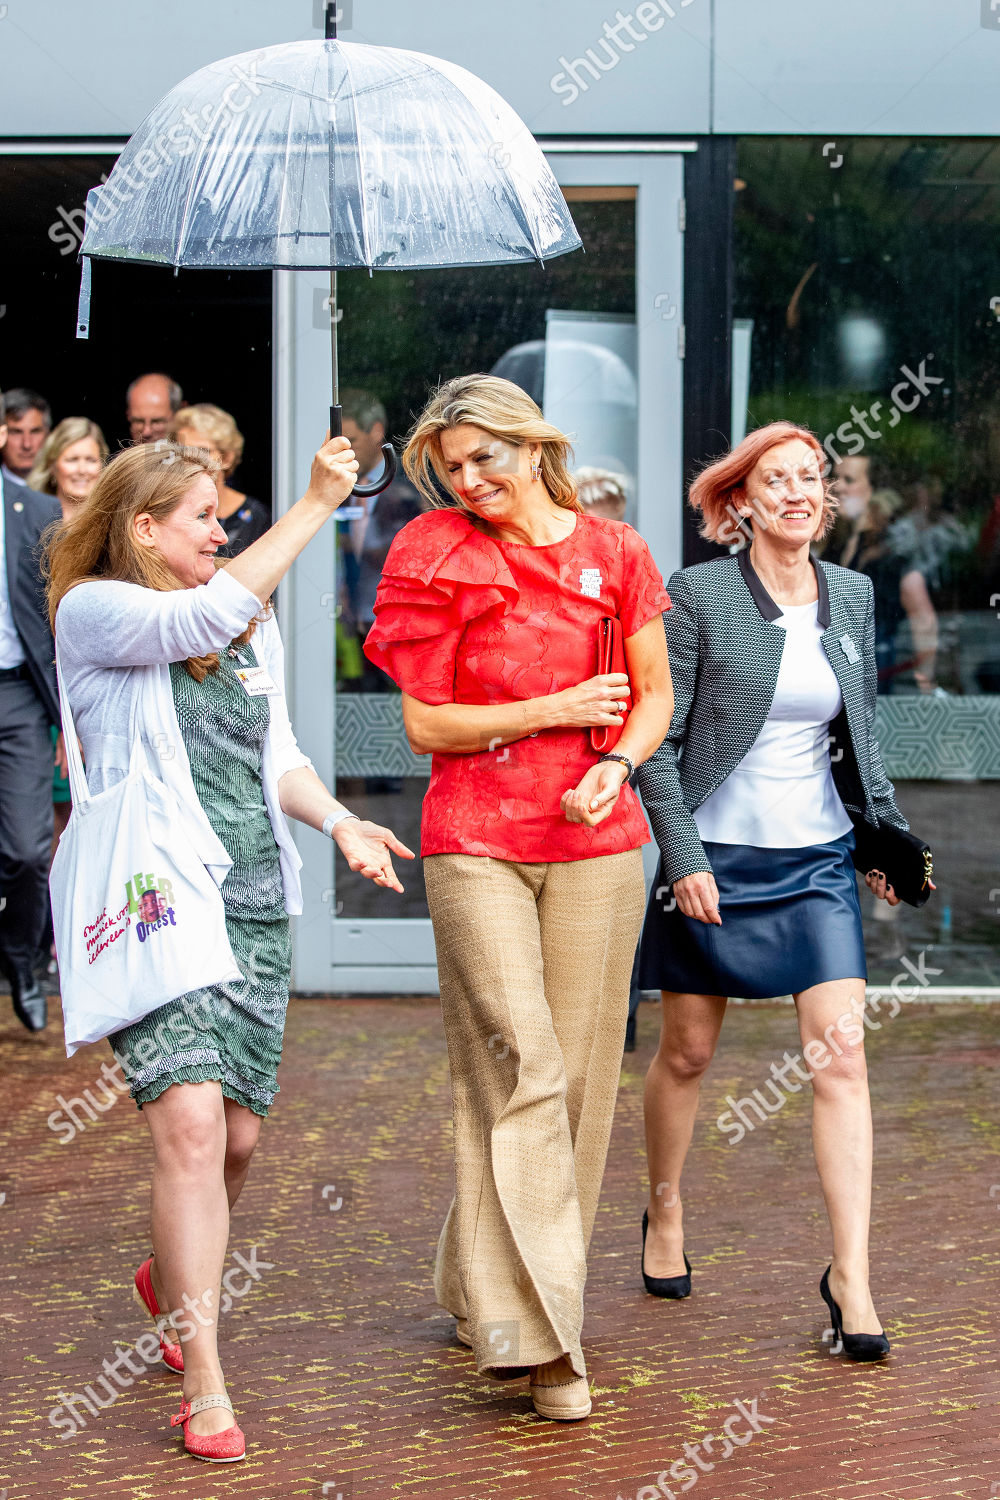 queen-maxima-signing-the-more-music-covenant-in-the-classroom-drenthe-the-netherlands-shutterstock-editorial-10317726ac.jpg